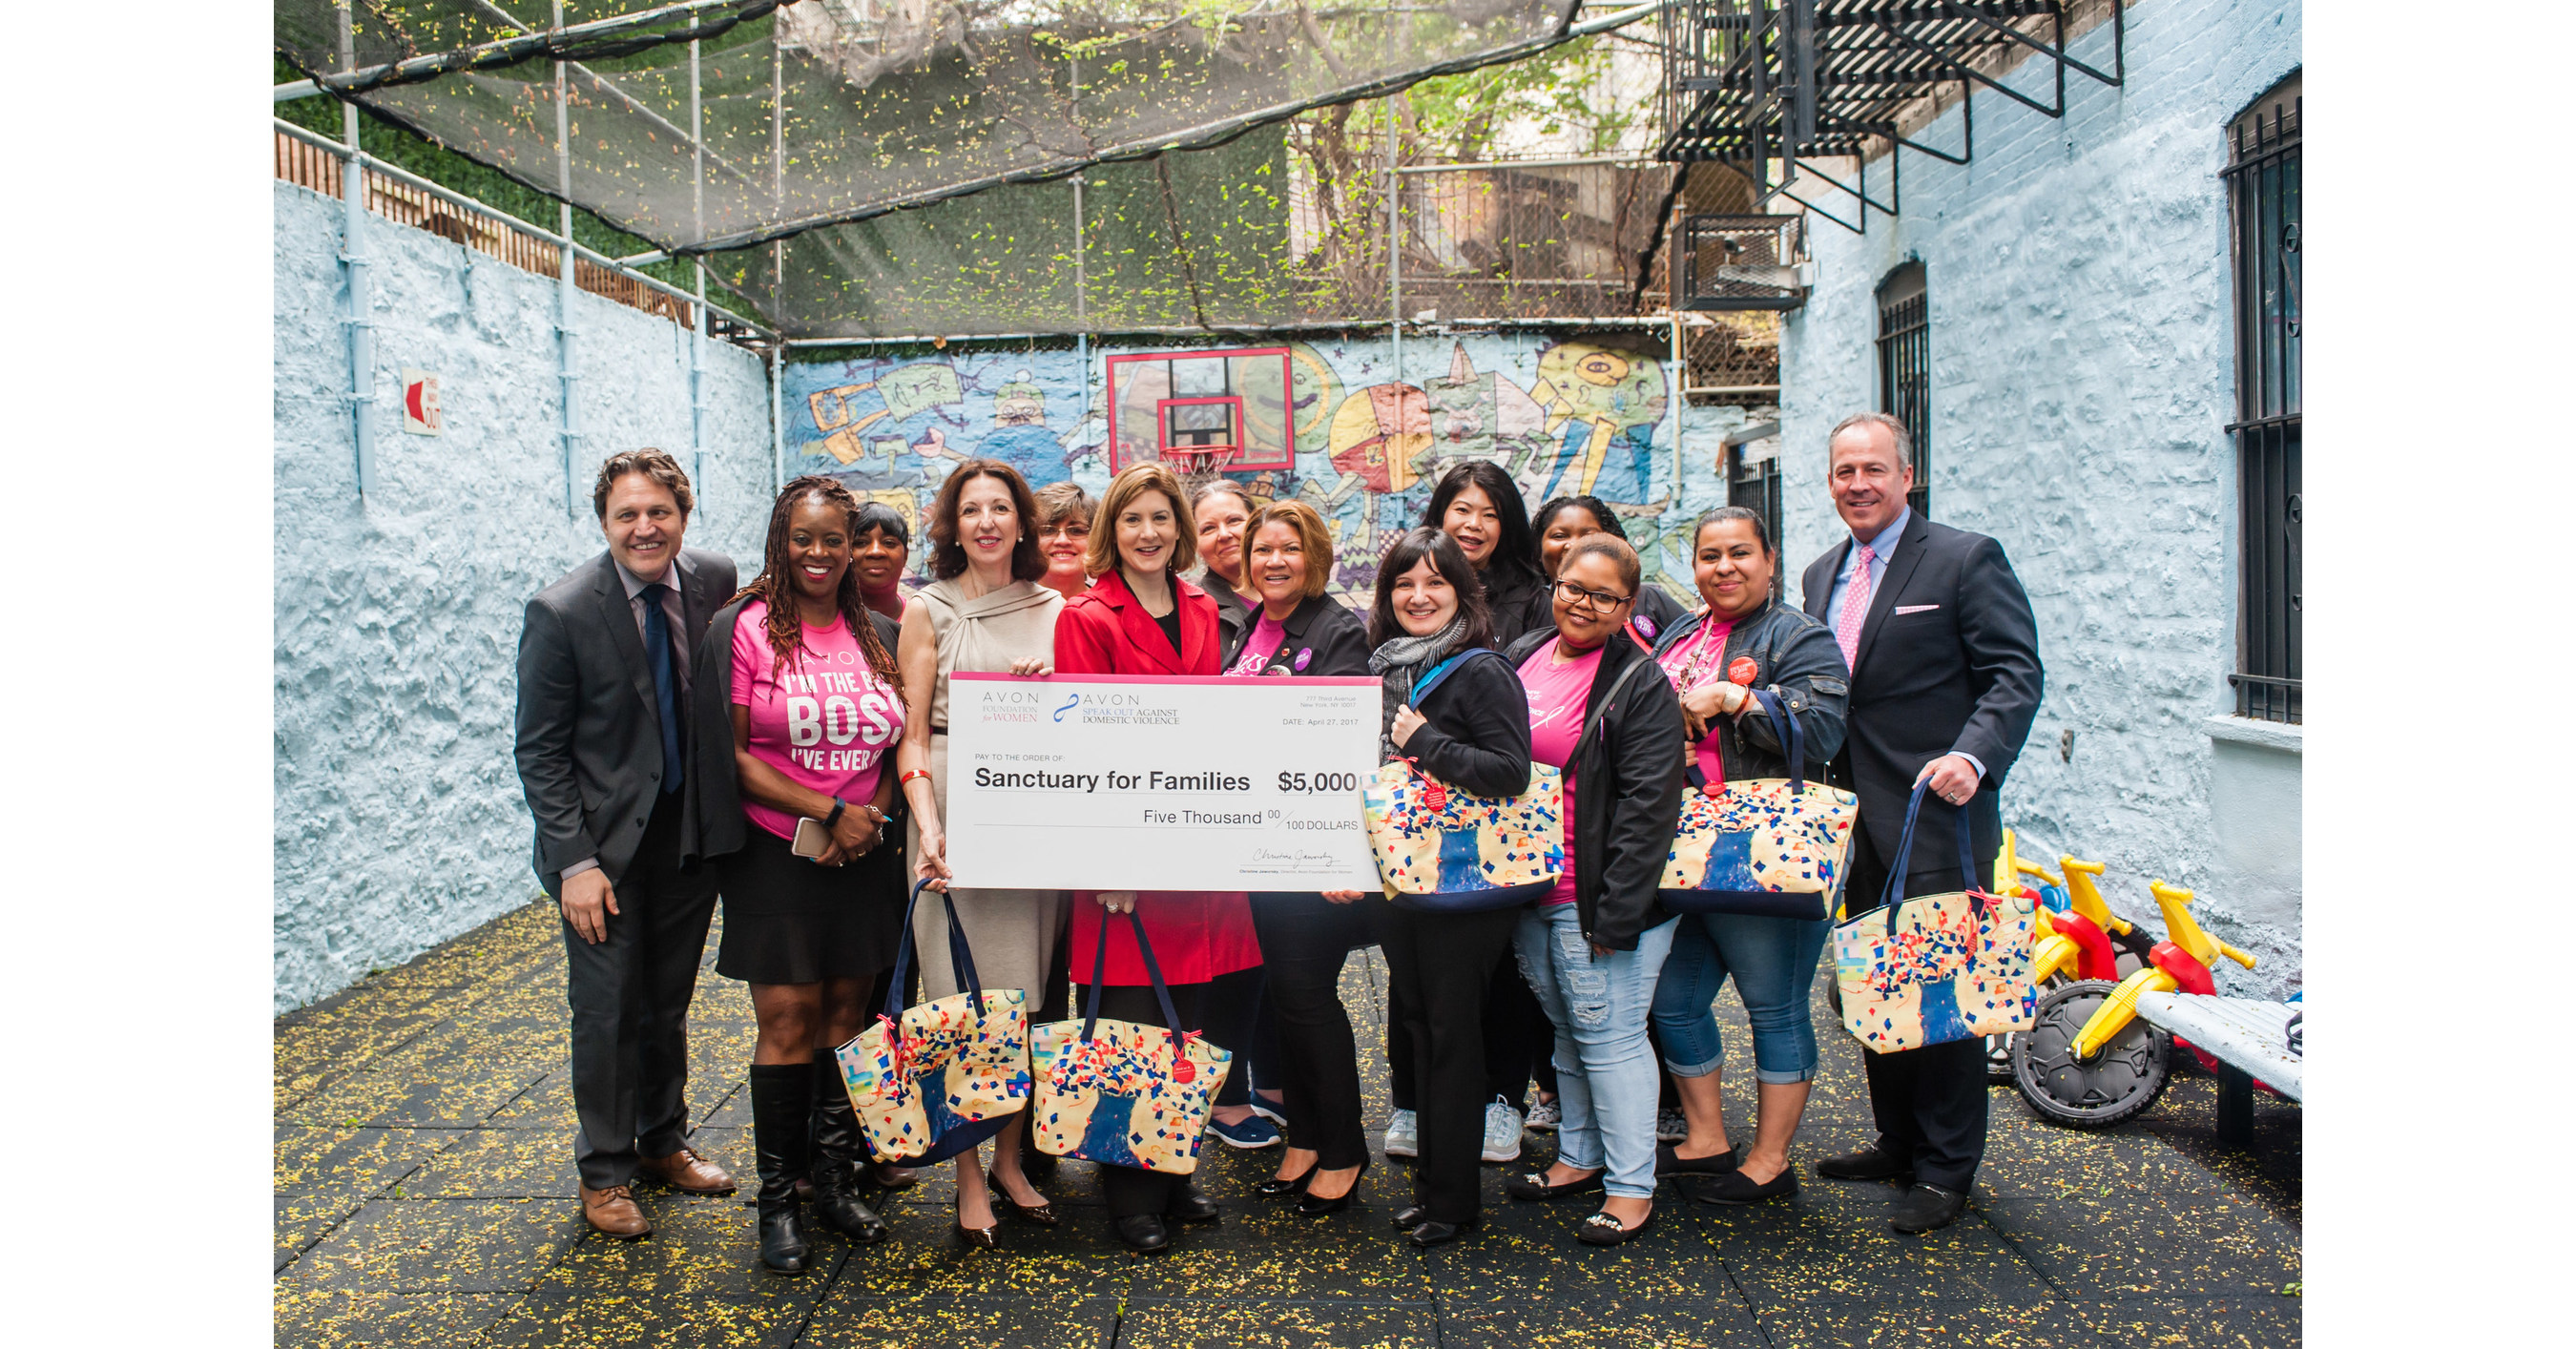 Avon Announces New Fundraising Initiative and Grant to New York City's Sanctuary for Families